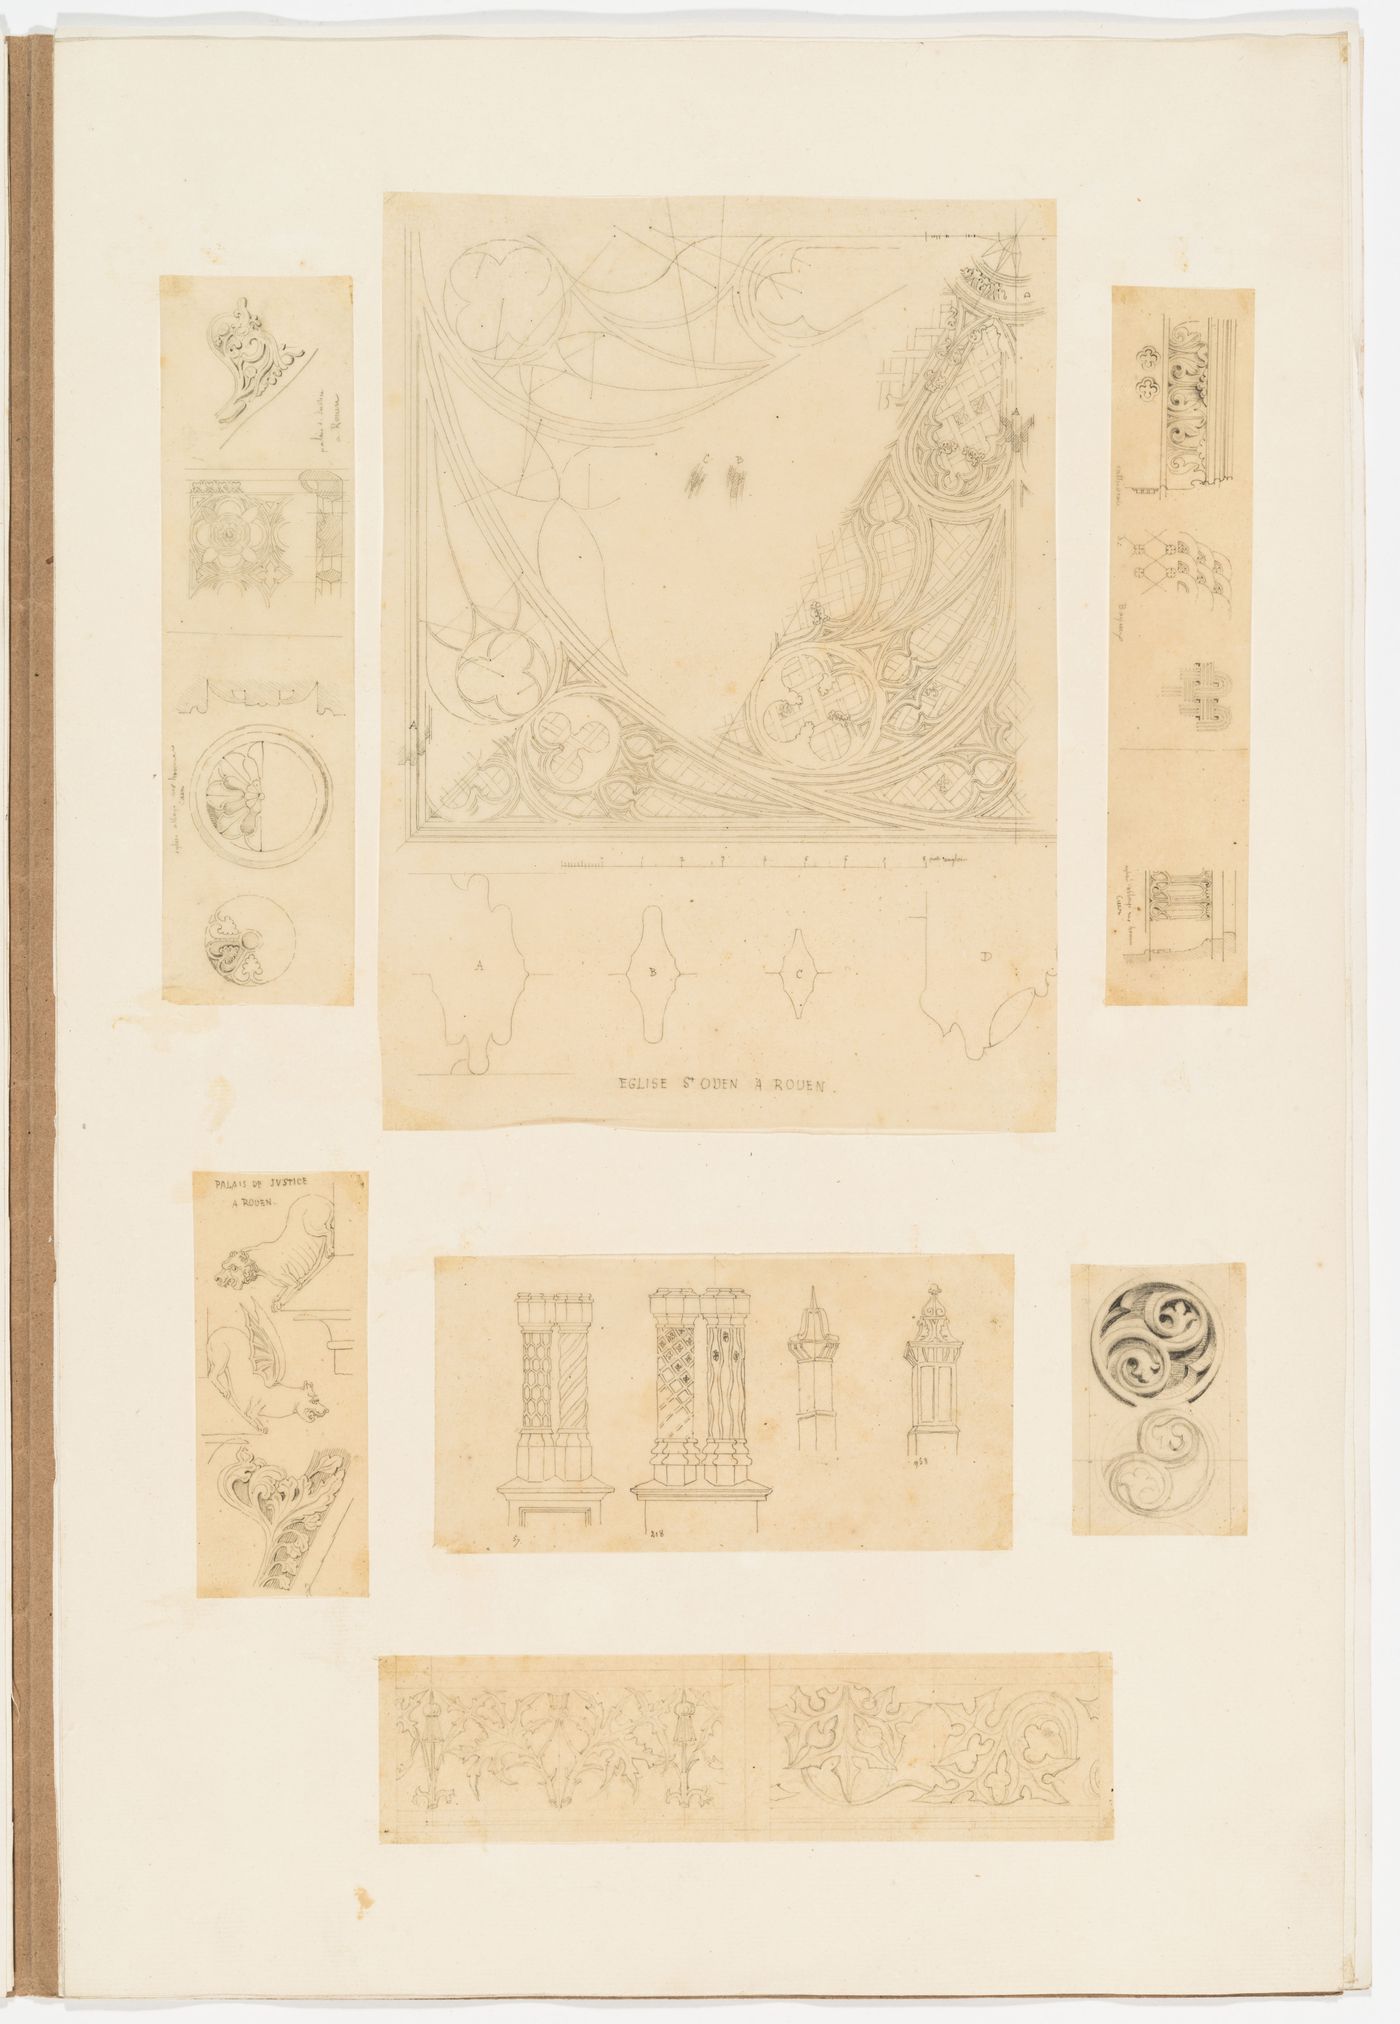 Seven drawings of Gothic architectural elements and ornament, from Abbaye aux Hommes, Caen, Palais de Justice and Abbaye St. Ouen, Rouen, Cathédrale Sainte-Marie, Bayonne, mainly copied from drawings by Pugin in 'The Architectural Antiquities of Normandy'